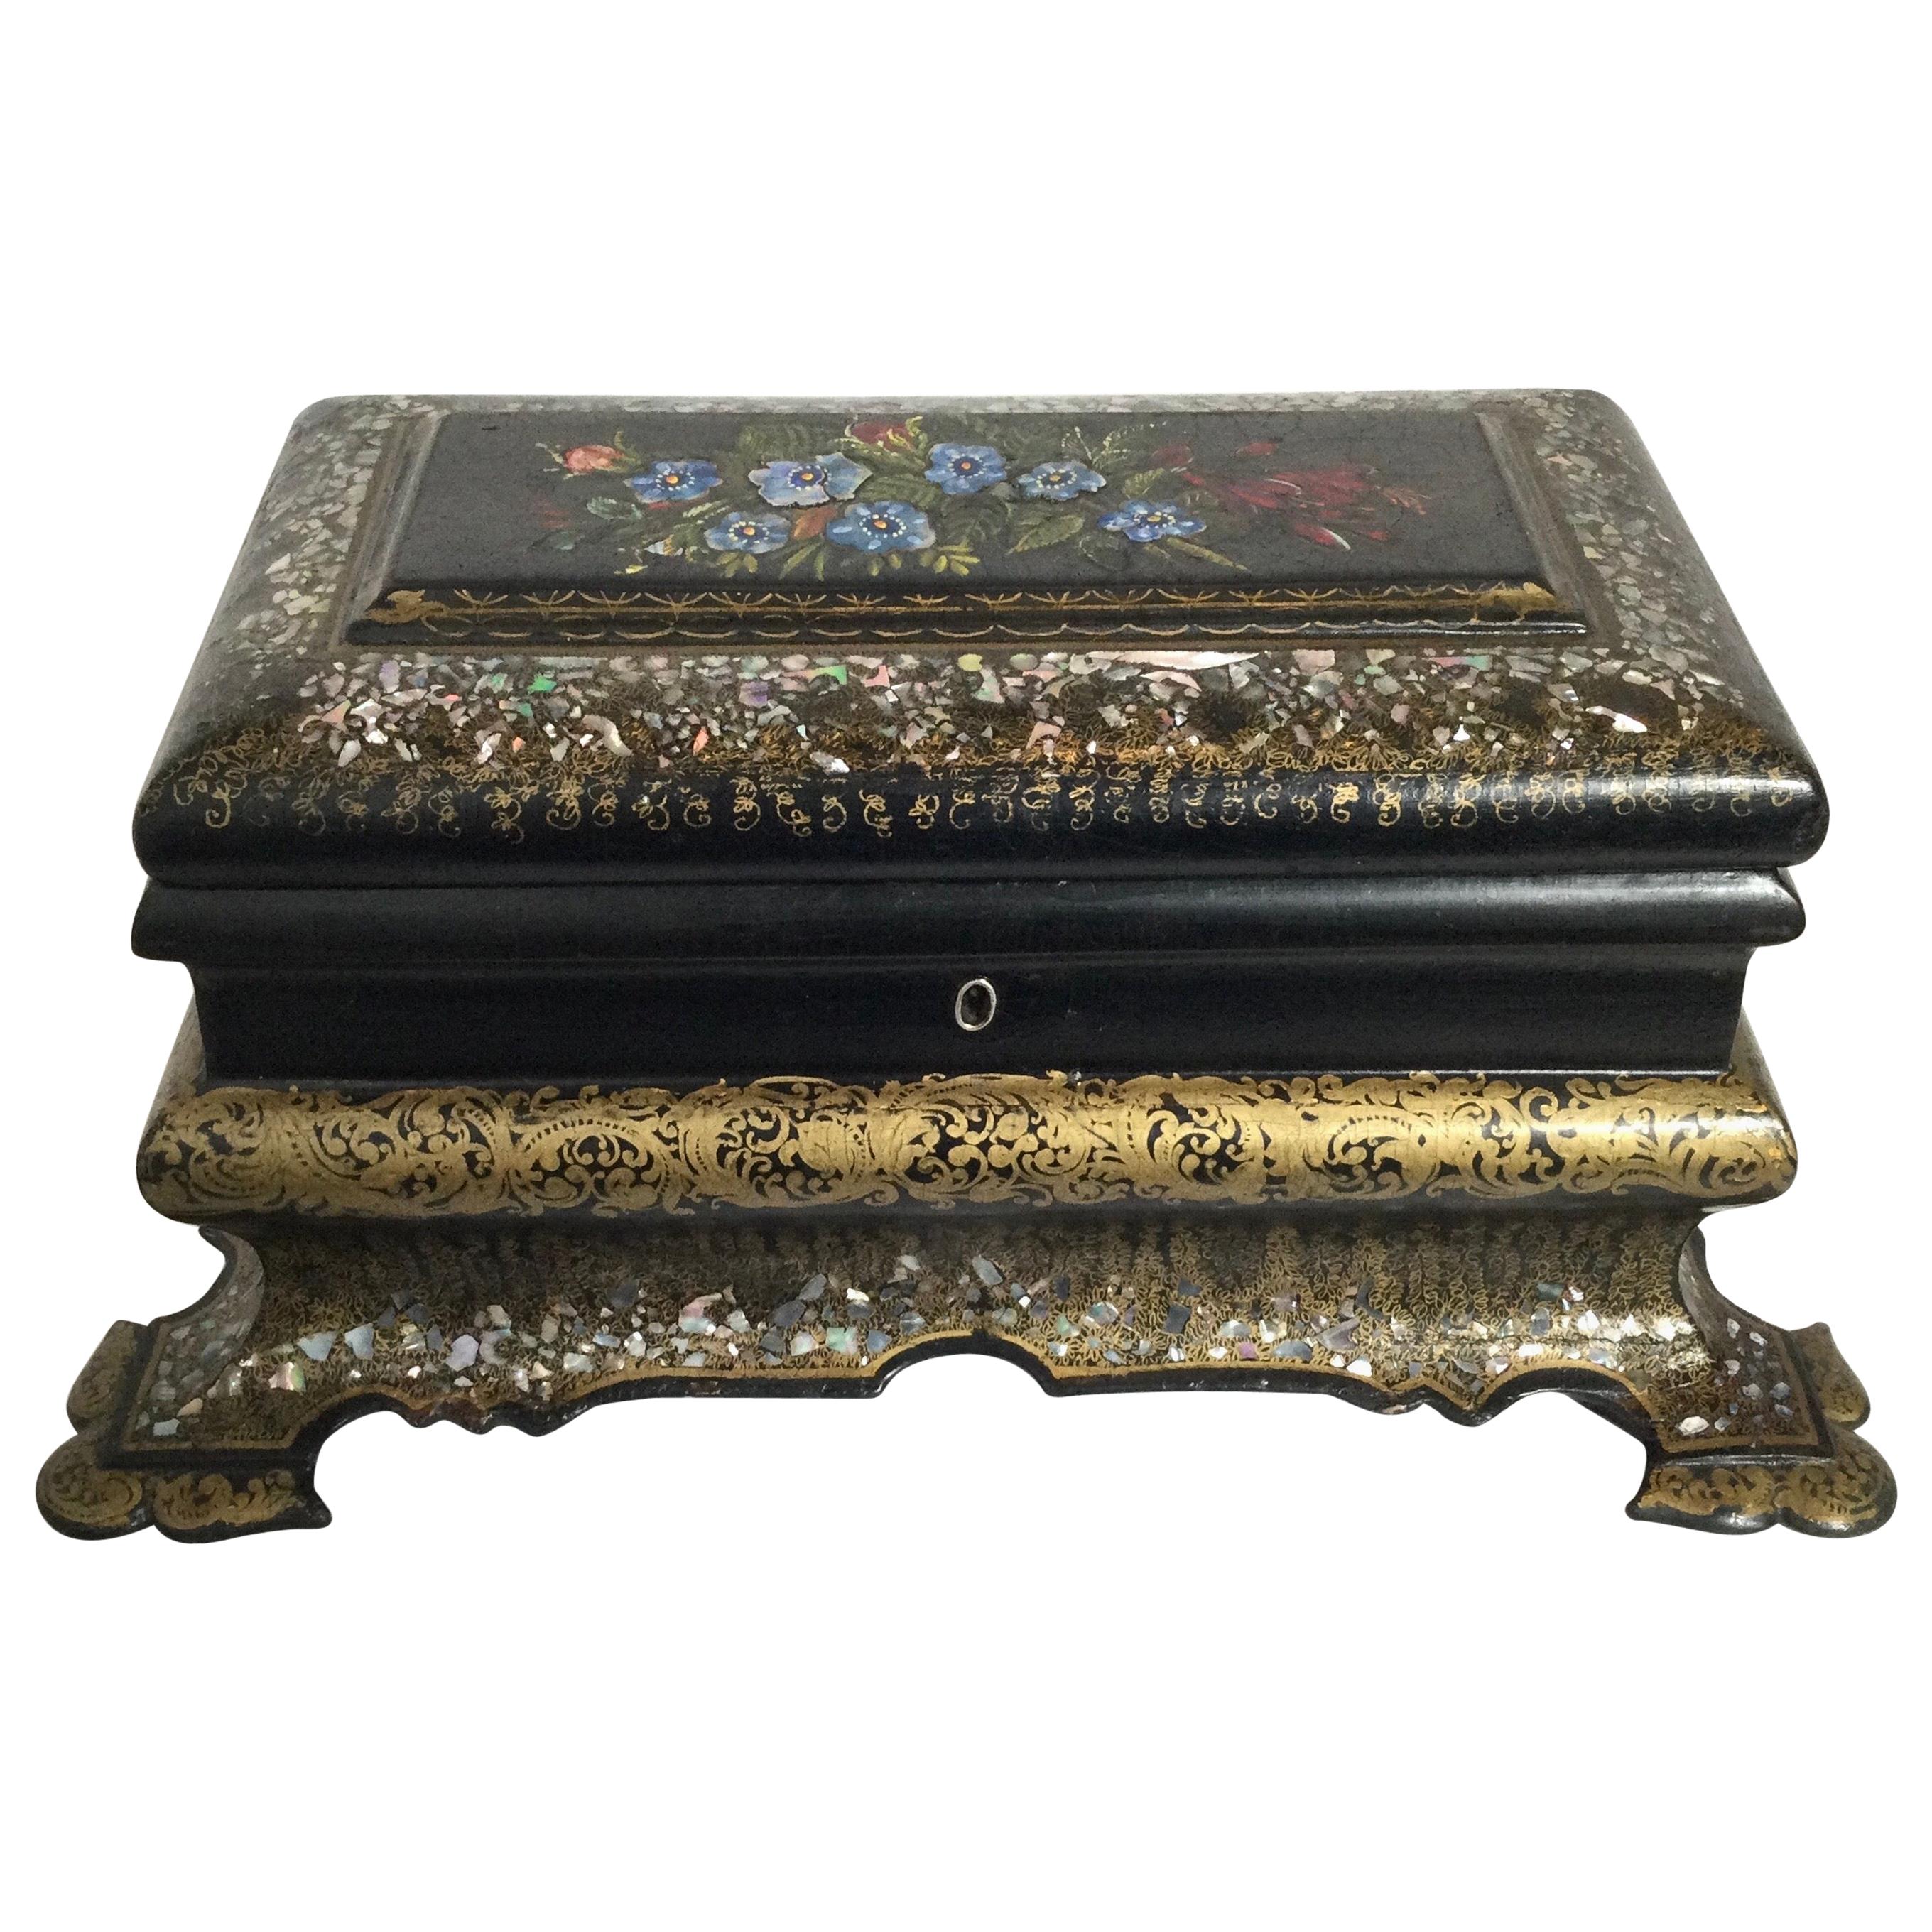 Victorian Gilt and Painted Paper Mâché with Mother of Pearl Tea Caddy